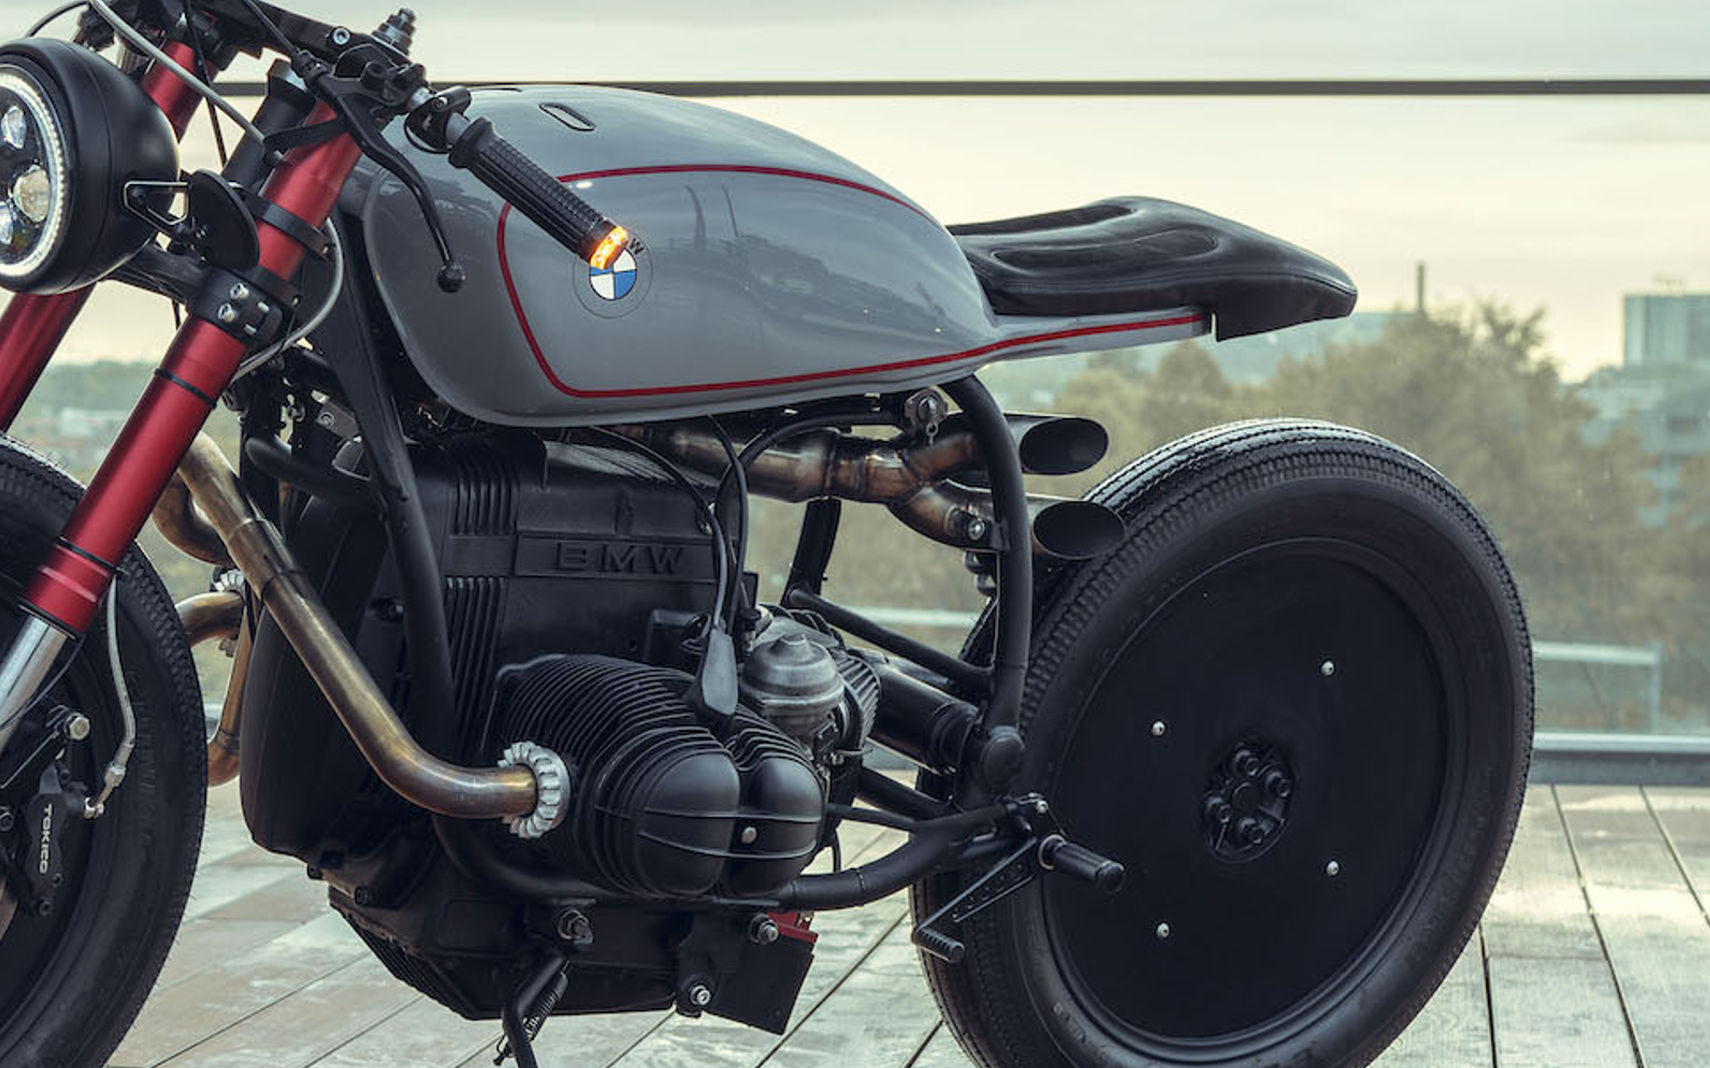 BMW R80 RT Cafe Racer by Moto Adonis